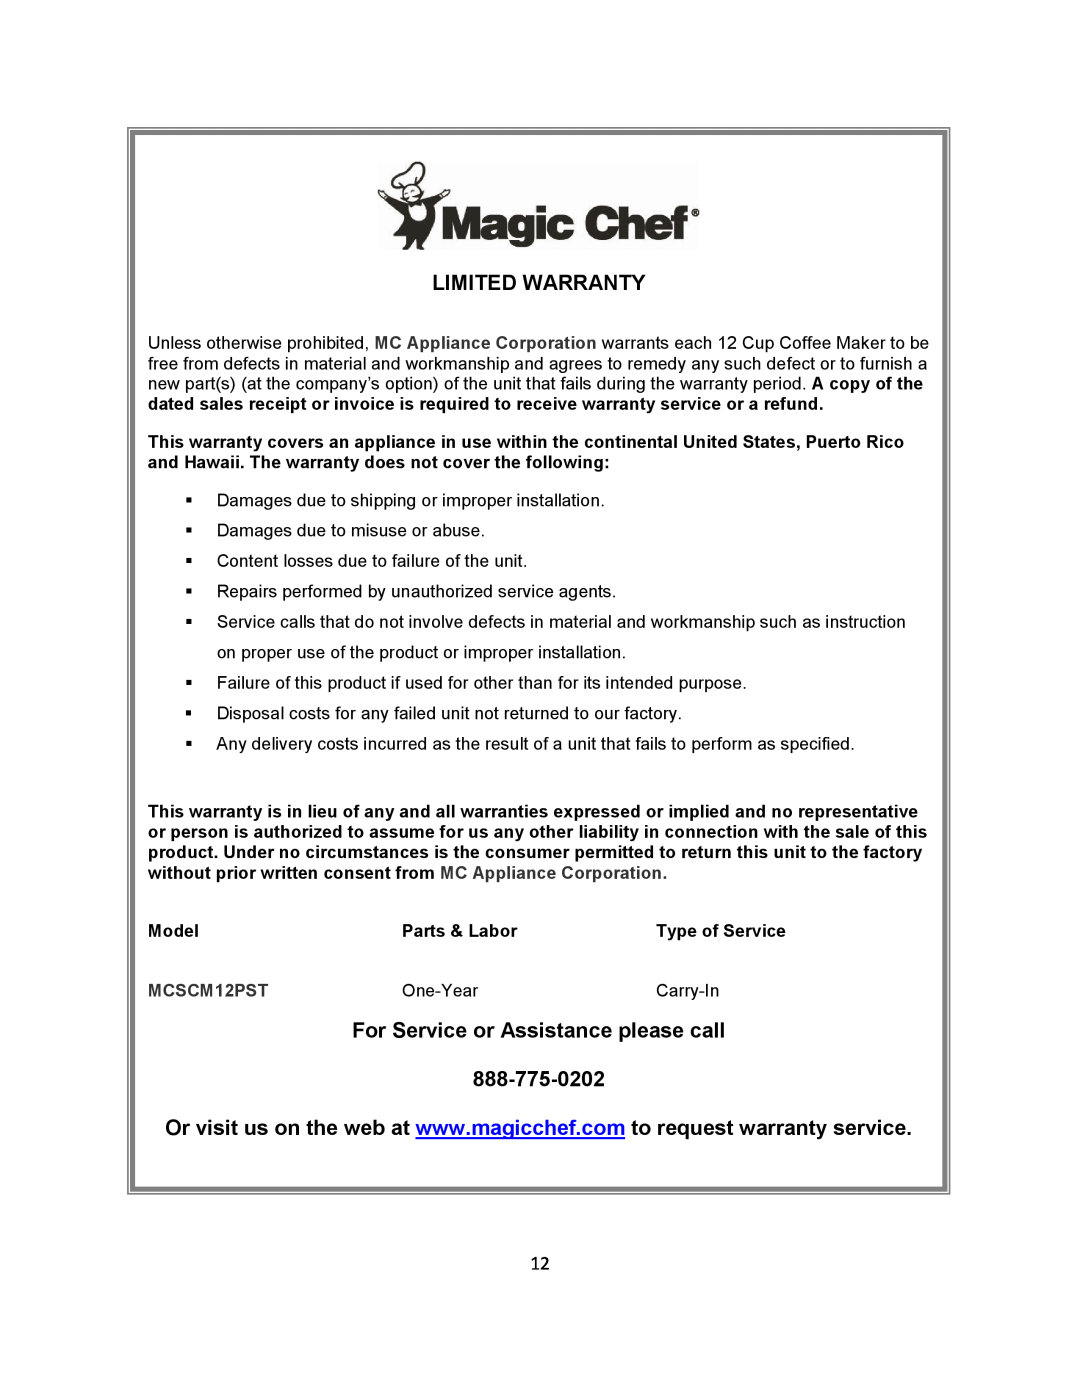 Magic Chef MCSCM12PST instruction manual Limited Warranty, For Service or Assistance please call 